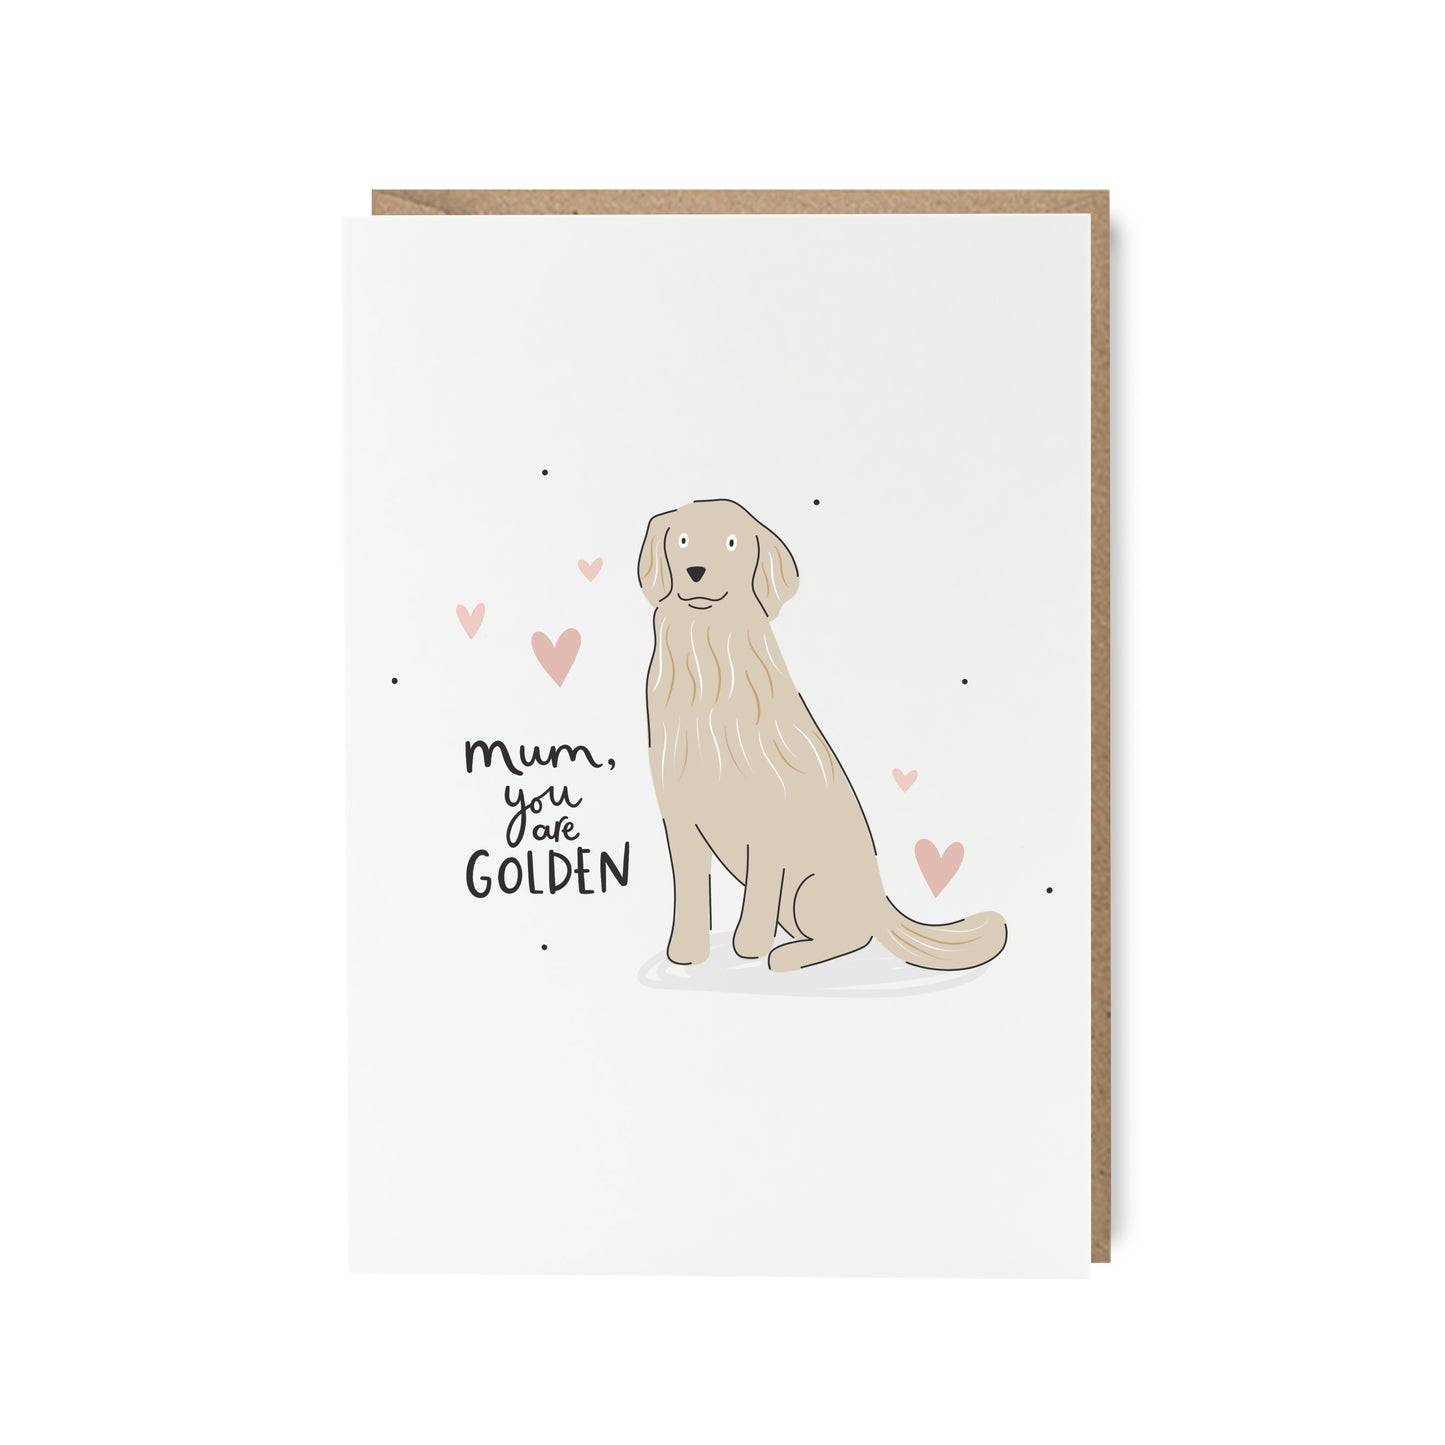 Mum, you are golden mother's day card featuring golden retriever dog